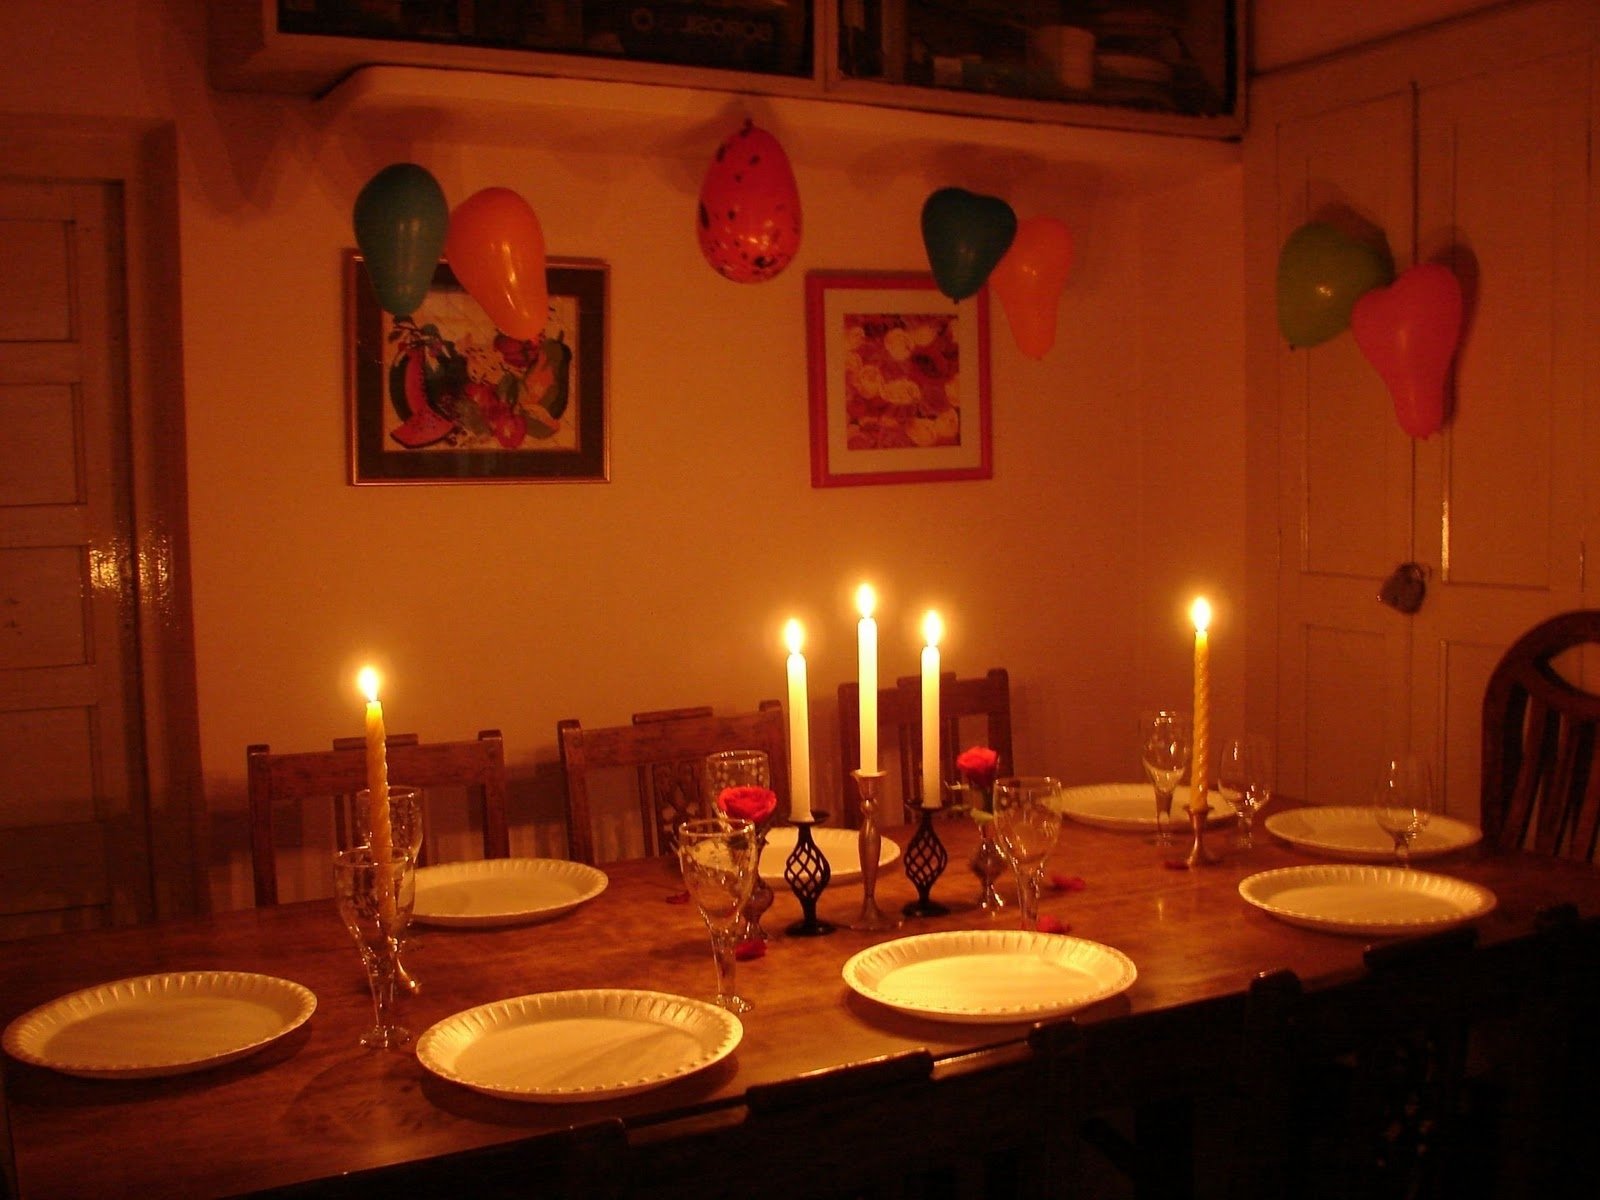 10 Gorgeous Romantic Dinner At Home Ideas romantic candle light dinner ideas at home download page e2 80 93 1 2023